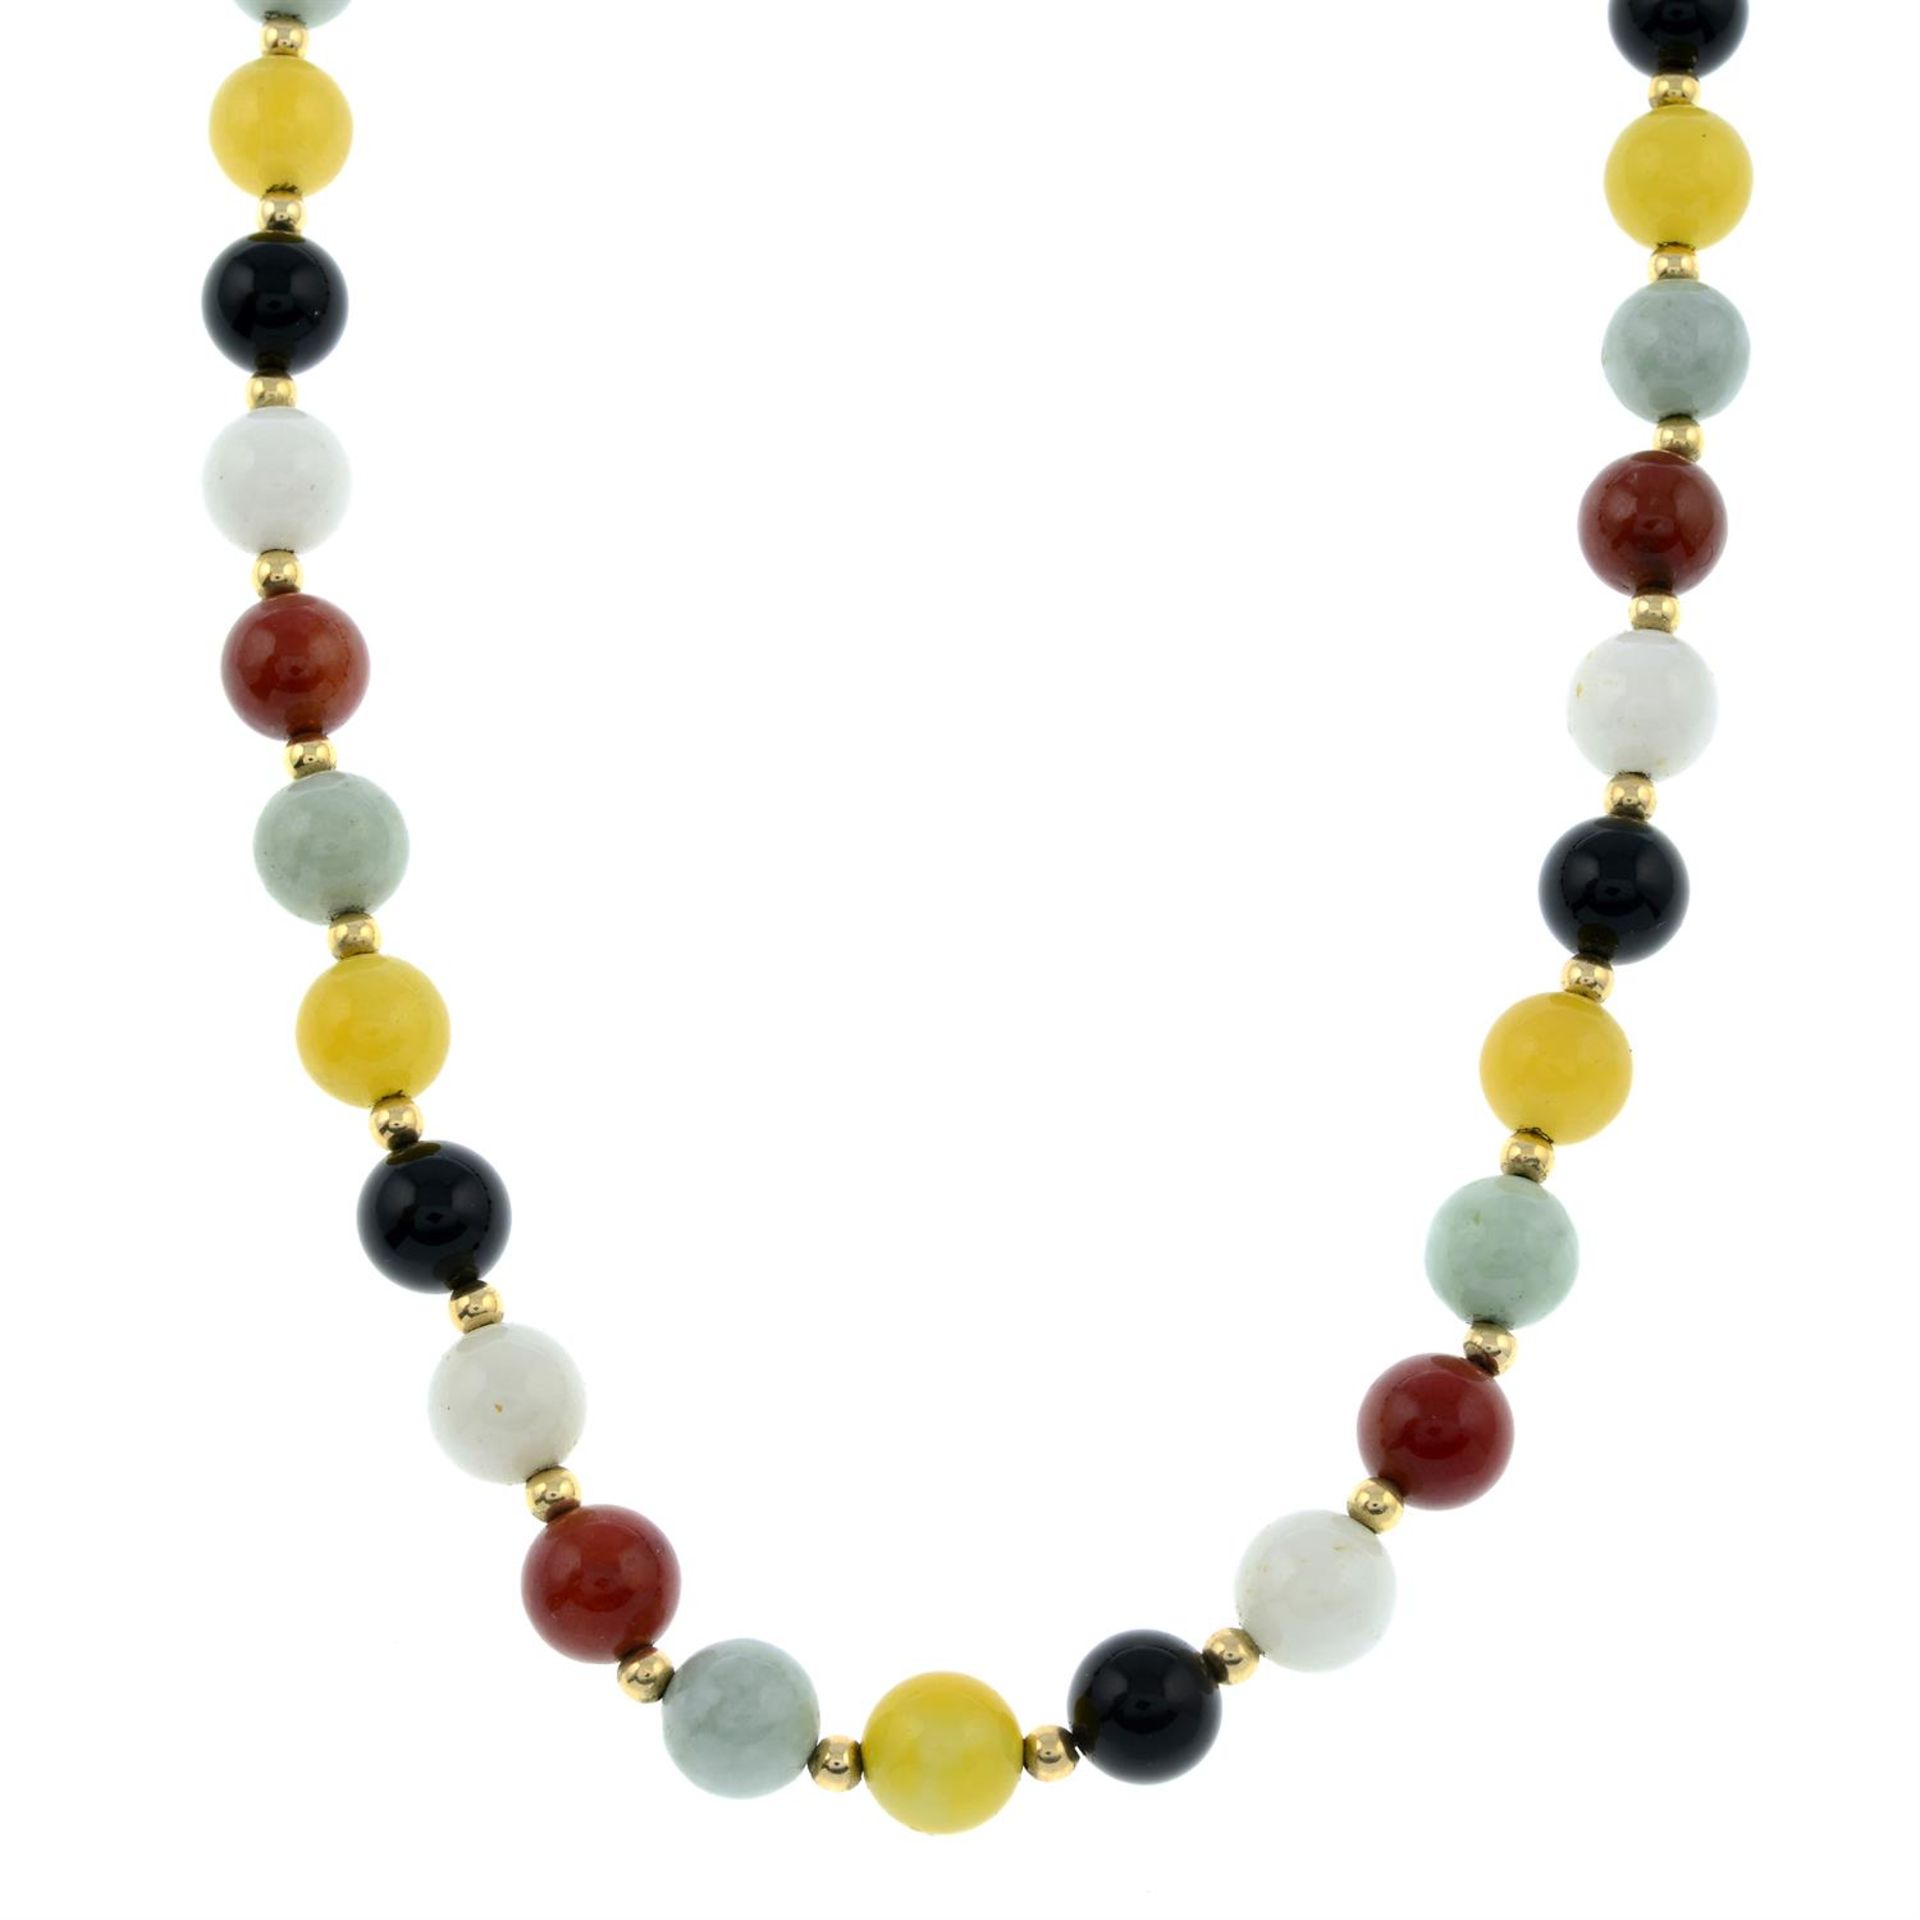 A multi-gem bead necklace, with 14ct gold clasp and spacers.